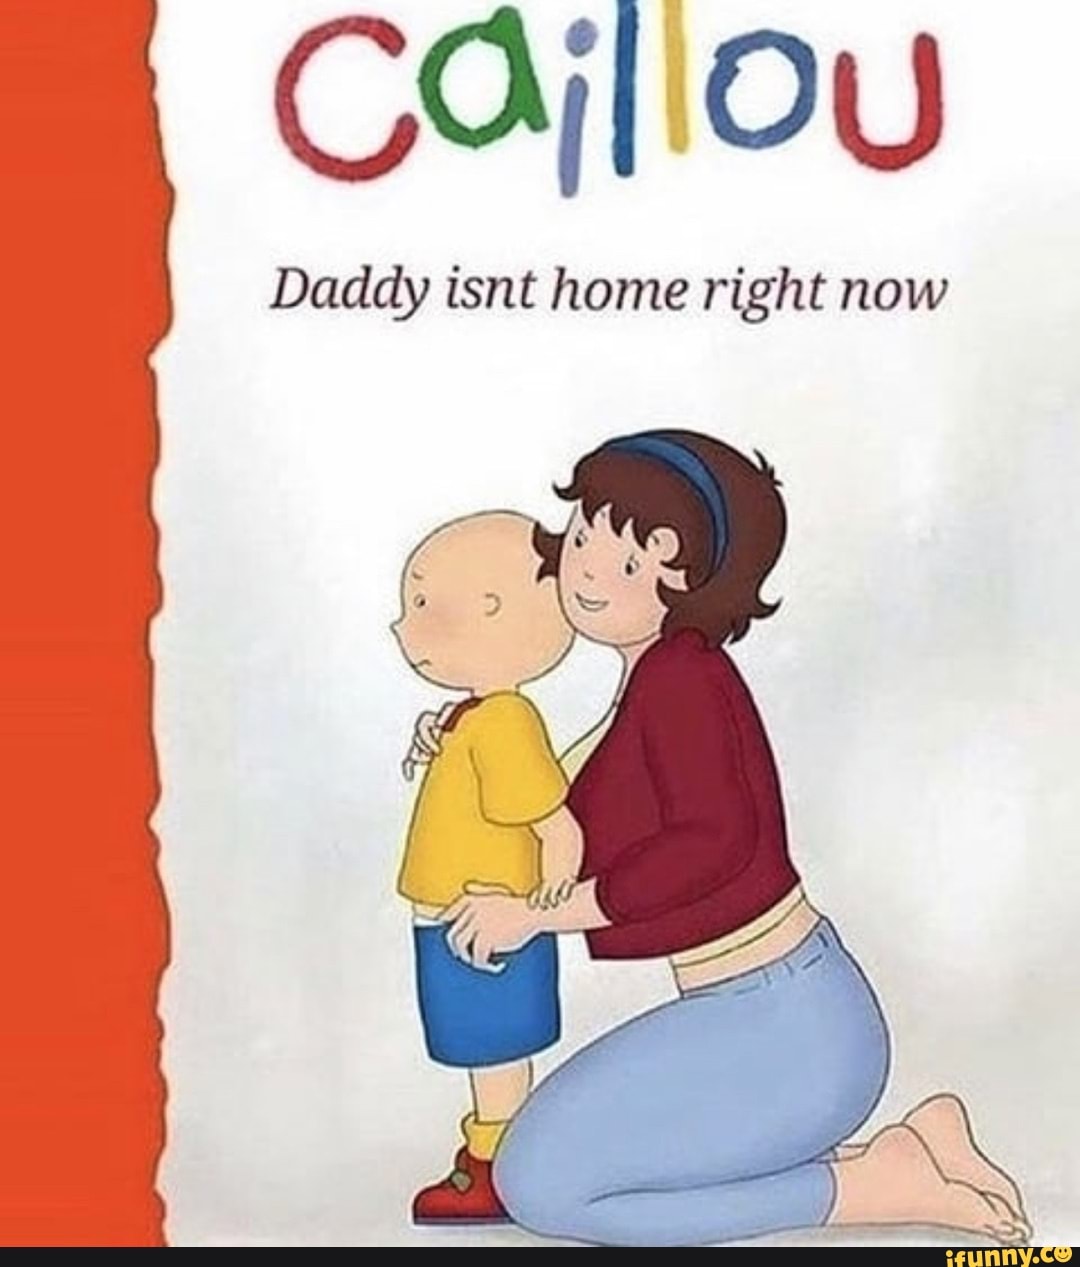 Caillou daddy isnt home right now comic